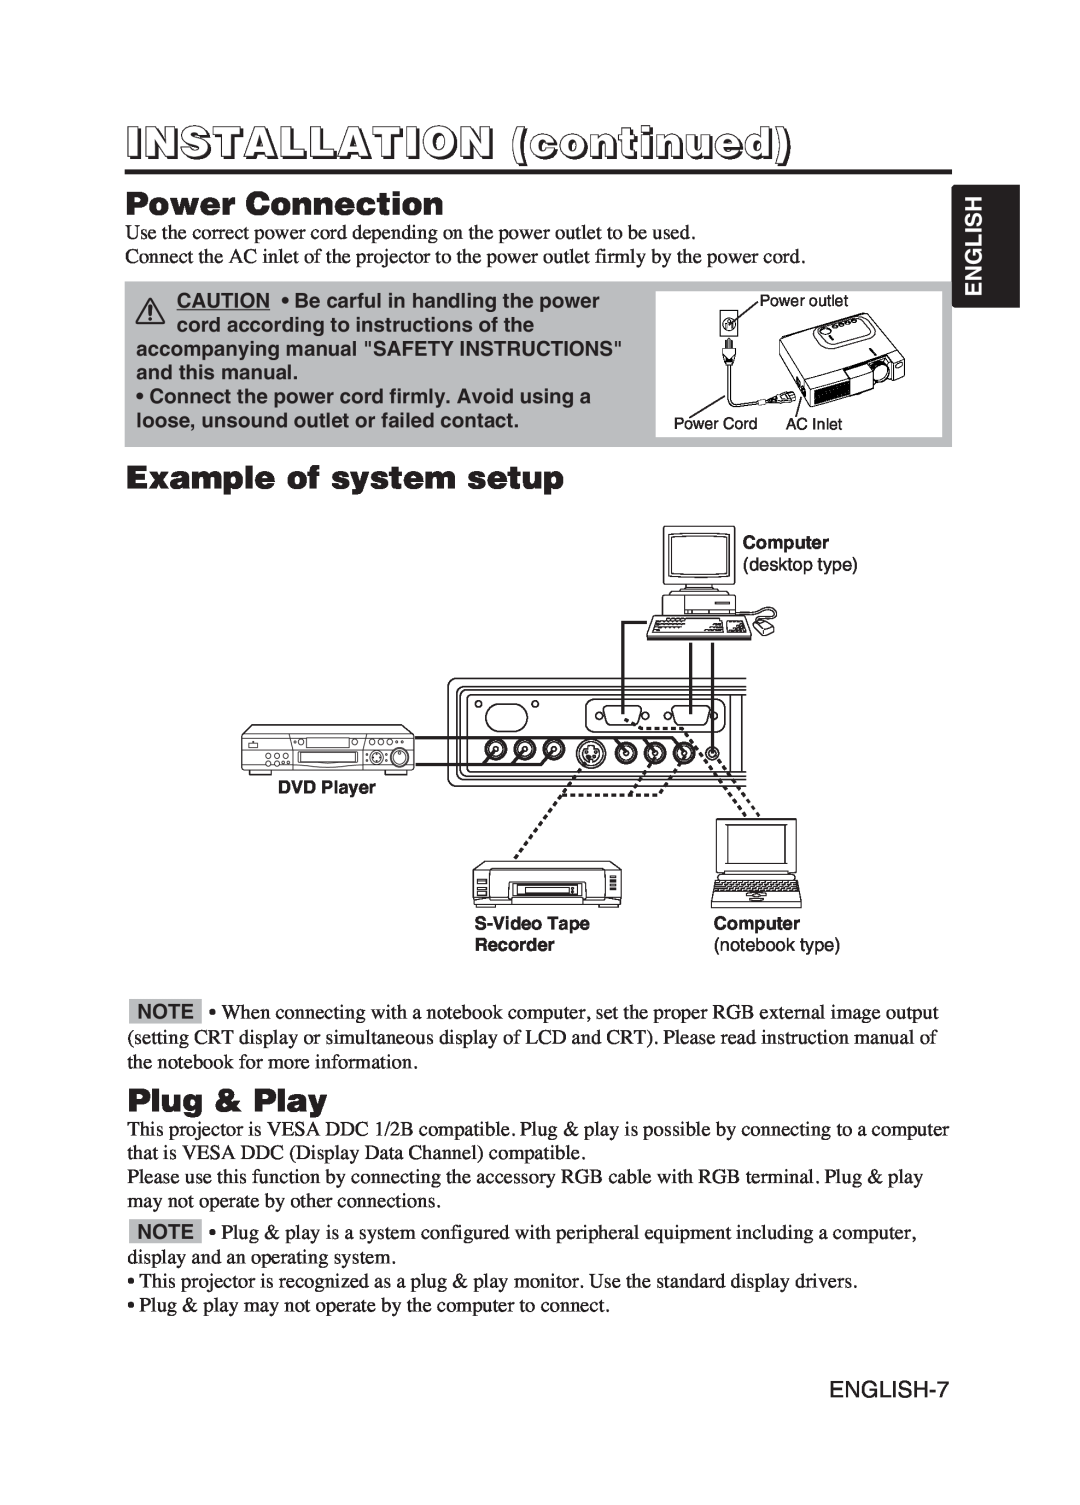 Hitachi CPS225W user manual Power Connection, Example of system setup, Plug & Play, INSTALLATION continued, English 